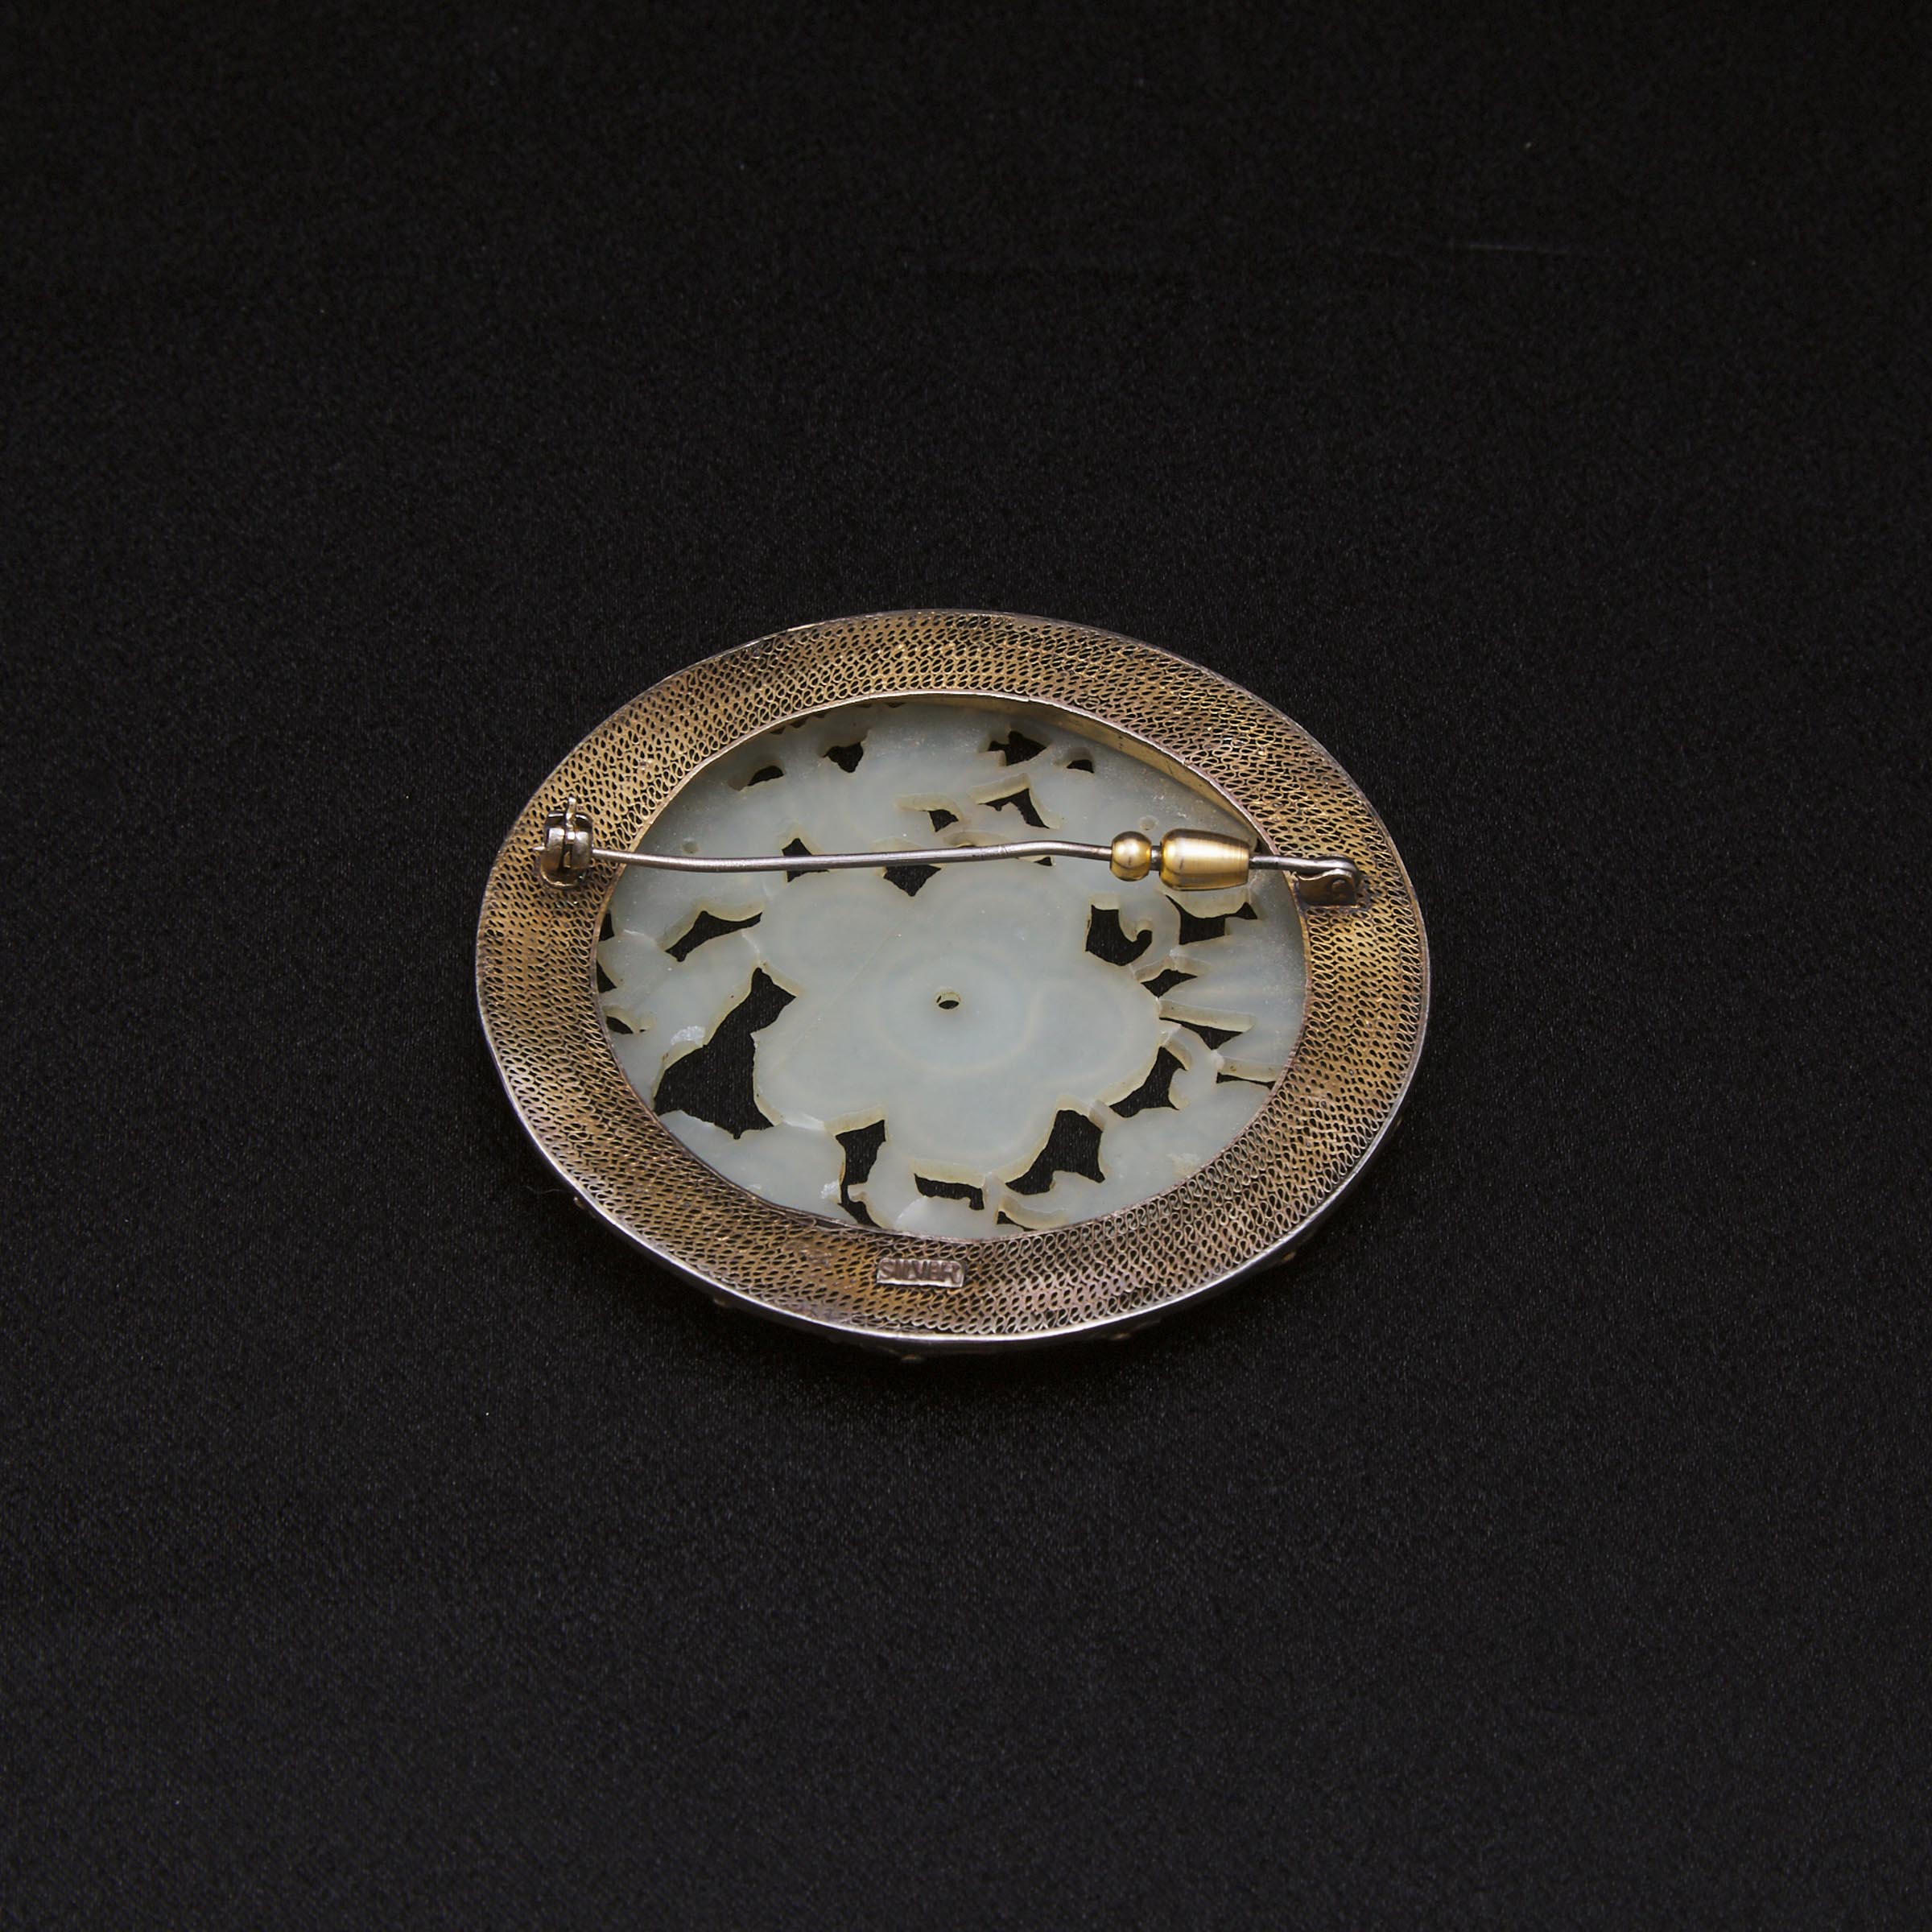 A Jade Plaque and Enamel Inlaid Silver Filigree Brooch, Late Qing Dynasty